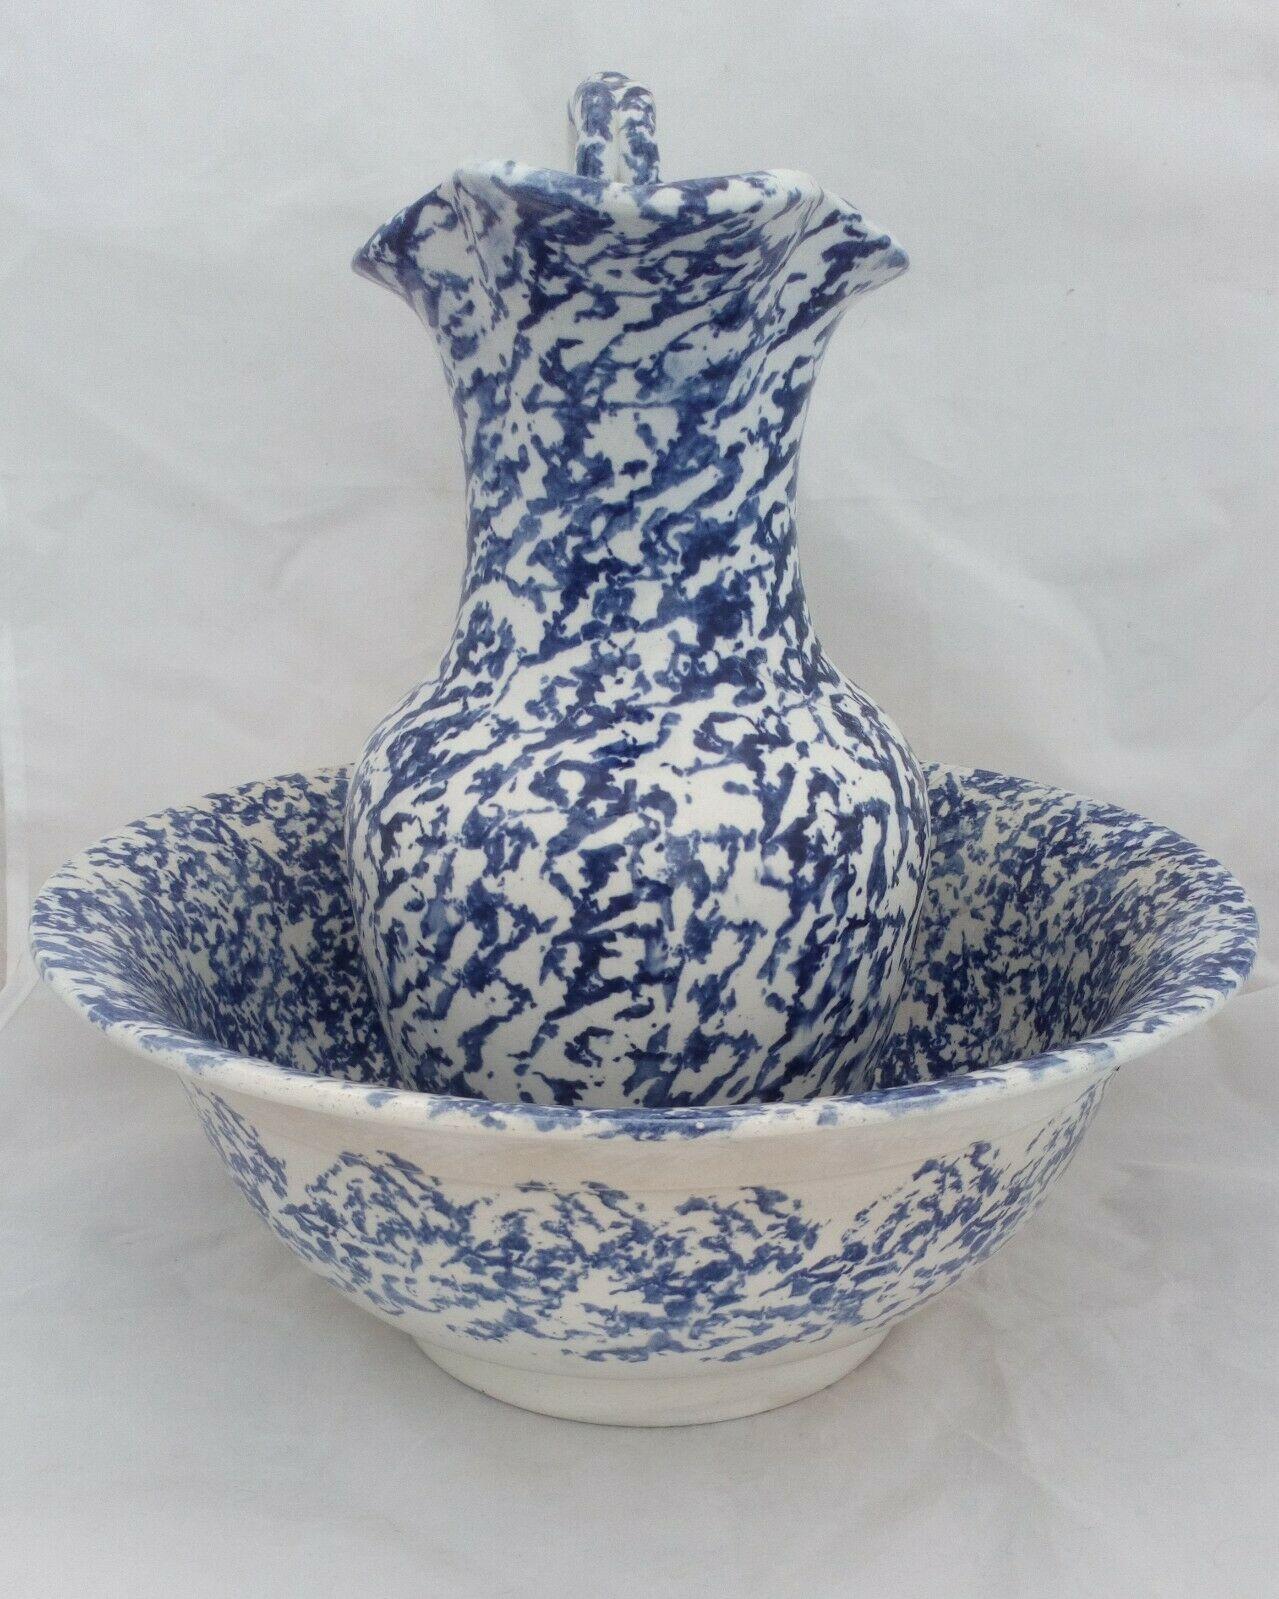 Antique Blue and White Spongeware Spatterware Pottery Toilet Jug and Basin 1850